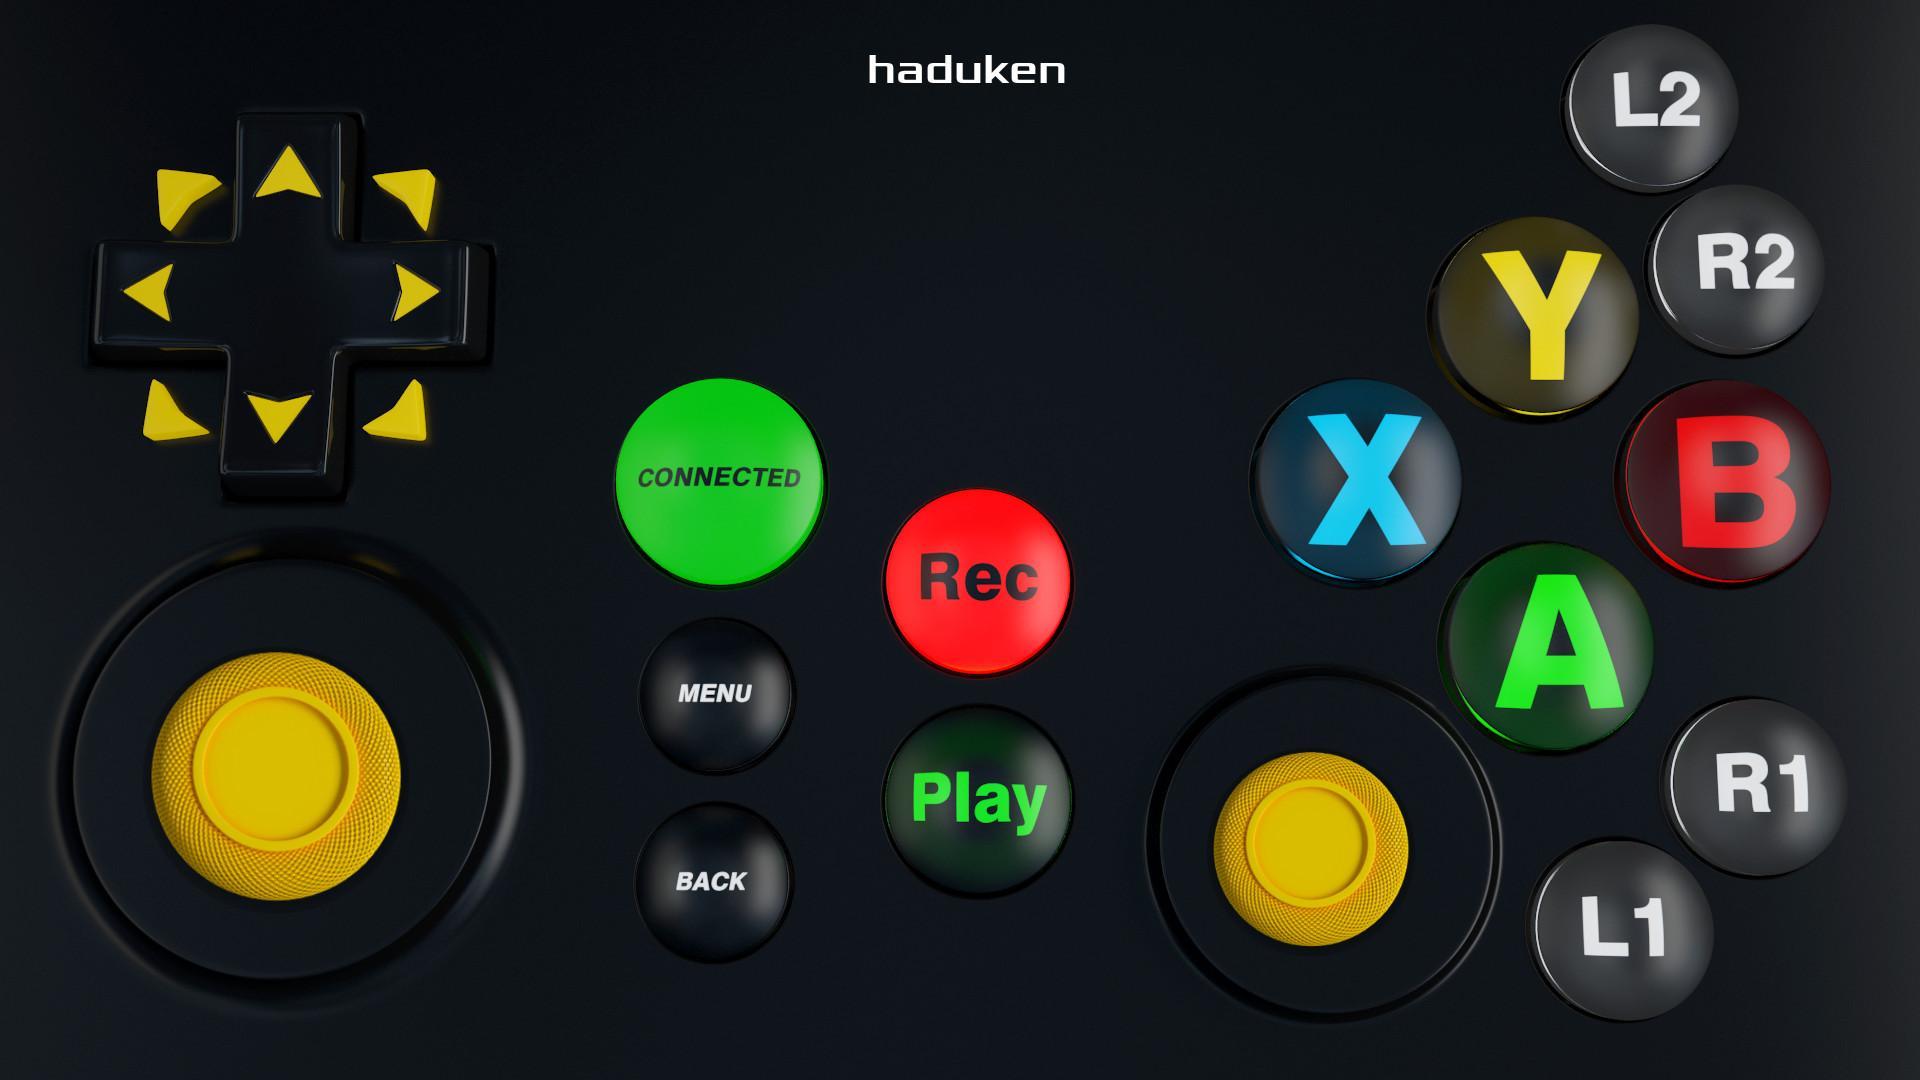 Gamepad Joystick MAXJoypad for Android - APK Download